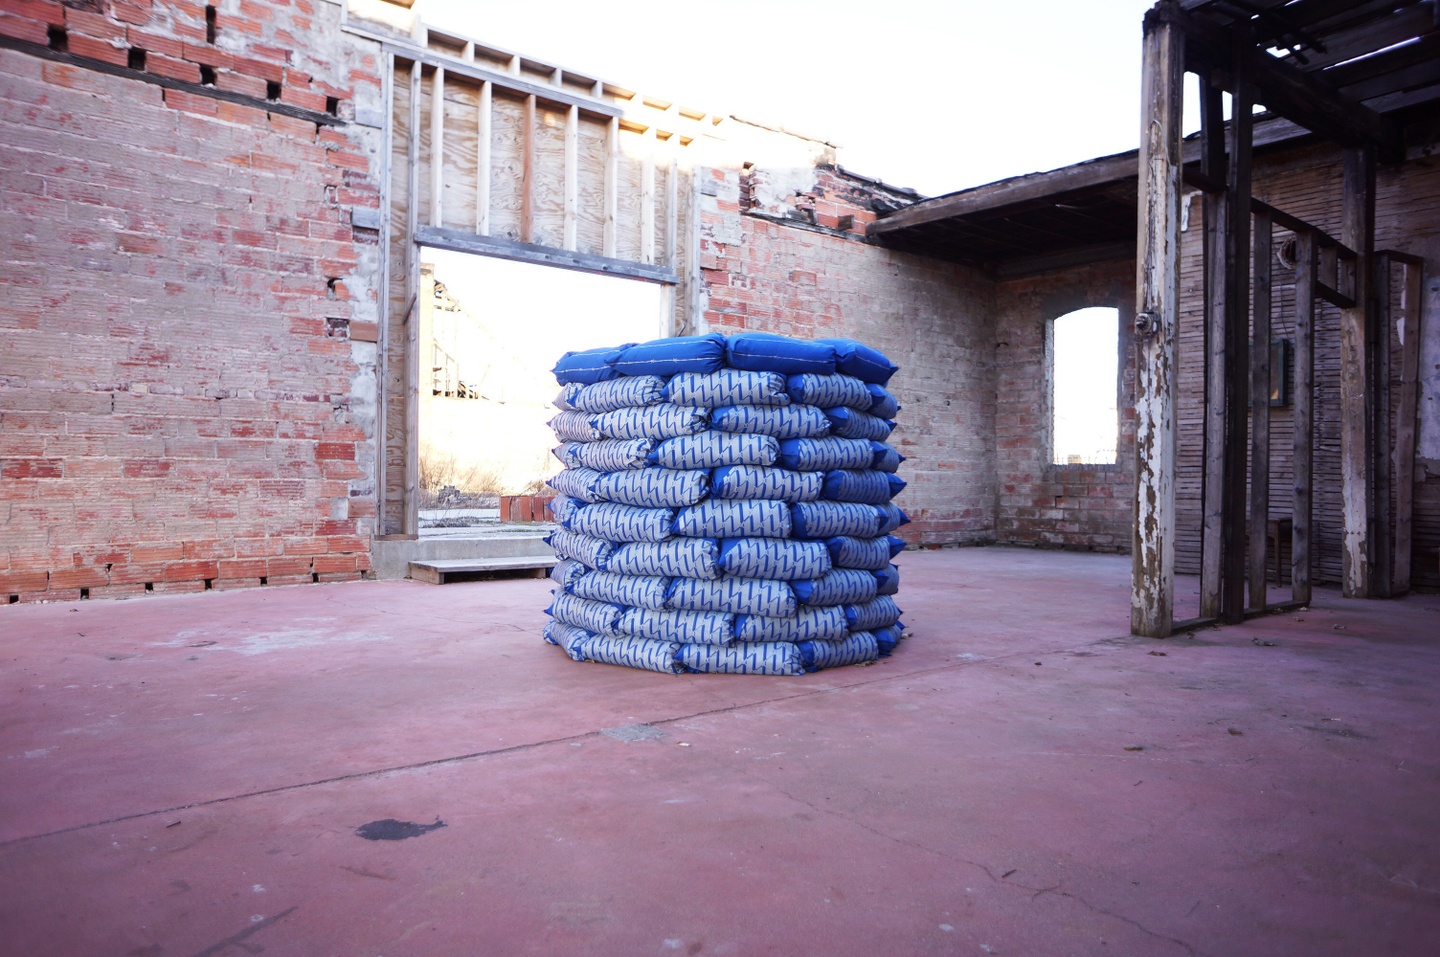 Photograph of a sculpture in space: the surroundings are an open-air brick and wood structure/building, with a faded red ground/floor; the sculpture is blue and white ,with a repeated geometric pattern printed on each layer.